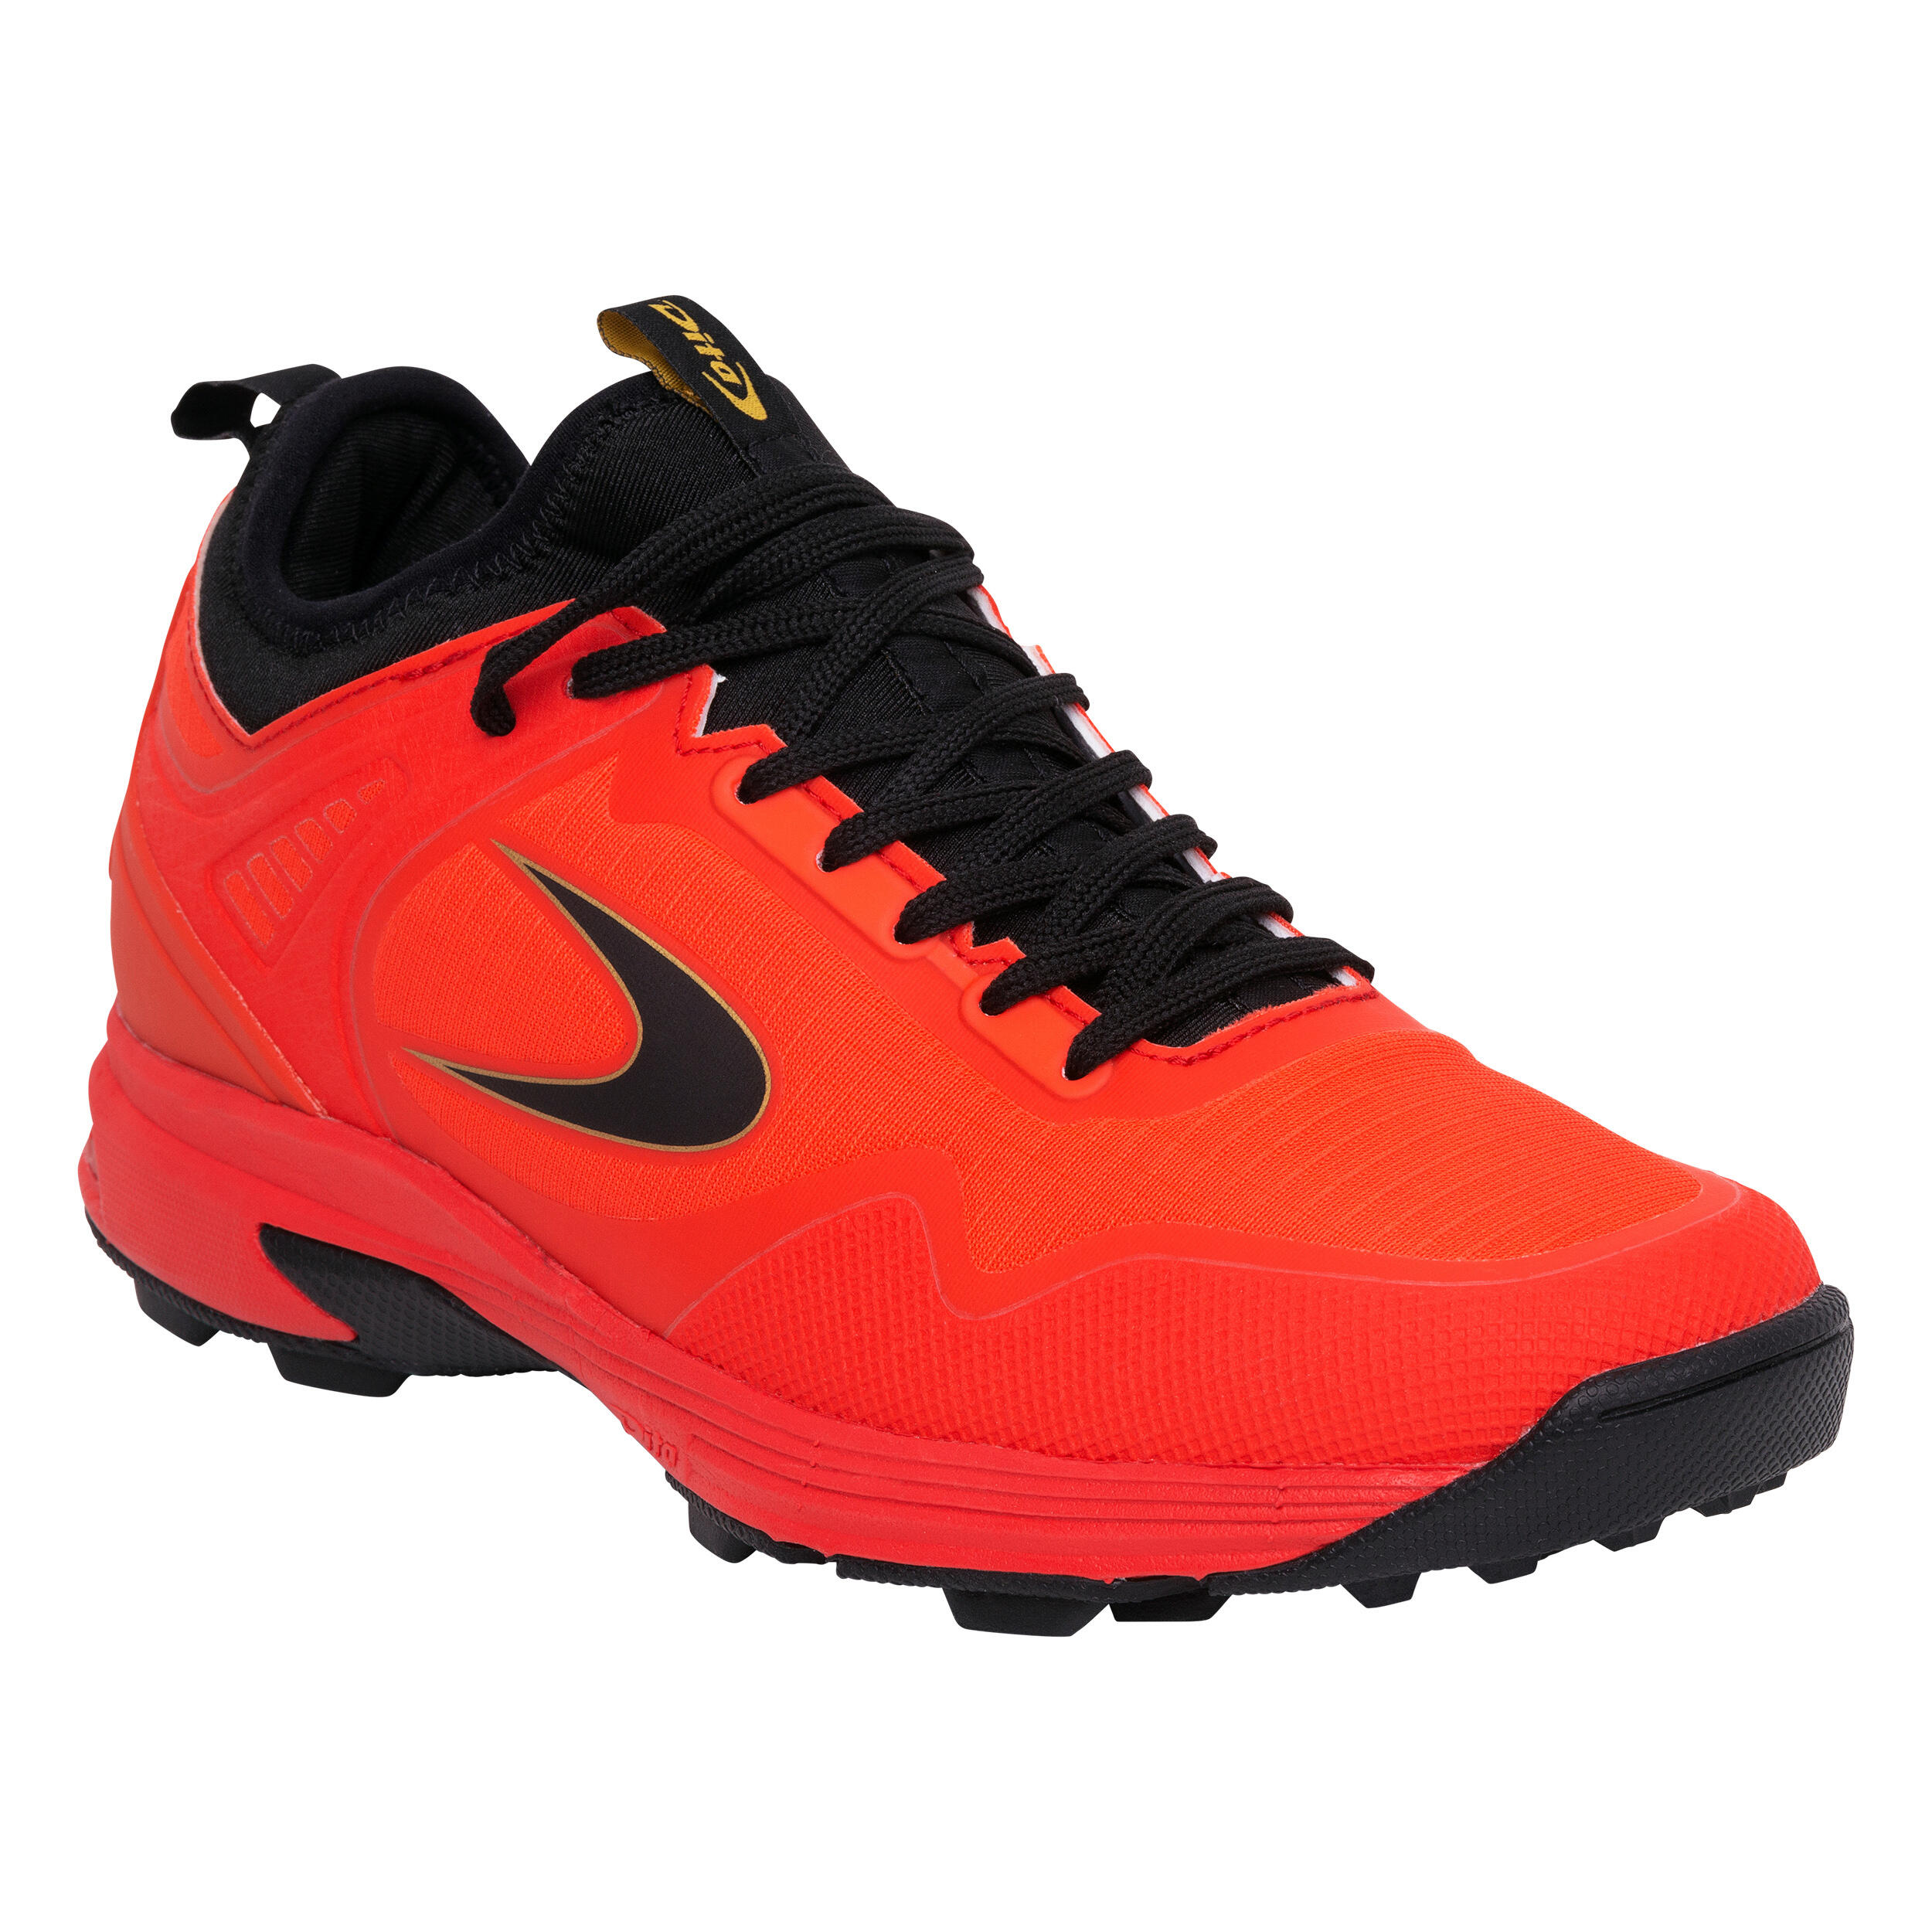 Adult High-Intensity Field Hockey Shoes LGHT 750 - Red 2/7